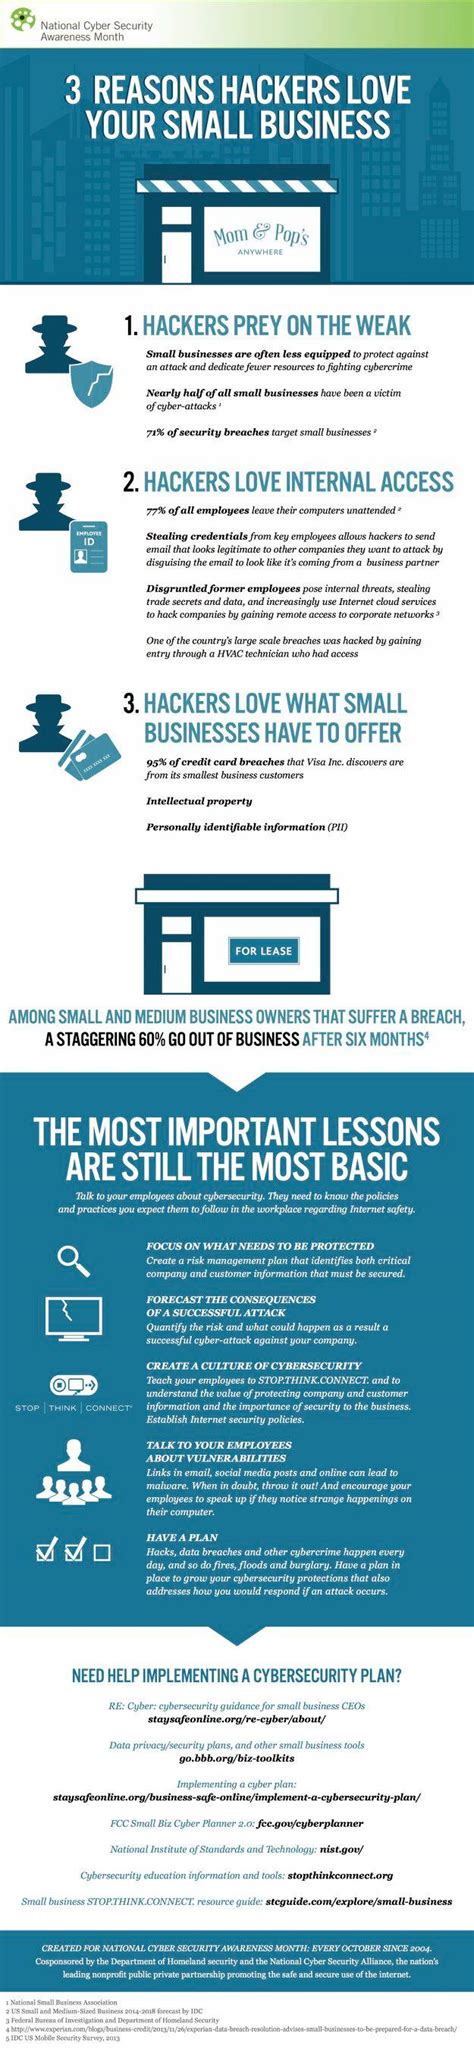 Learn How To Protect Your Small And Medium Sized Businesses With This